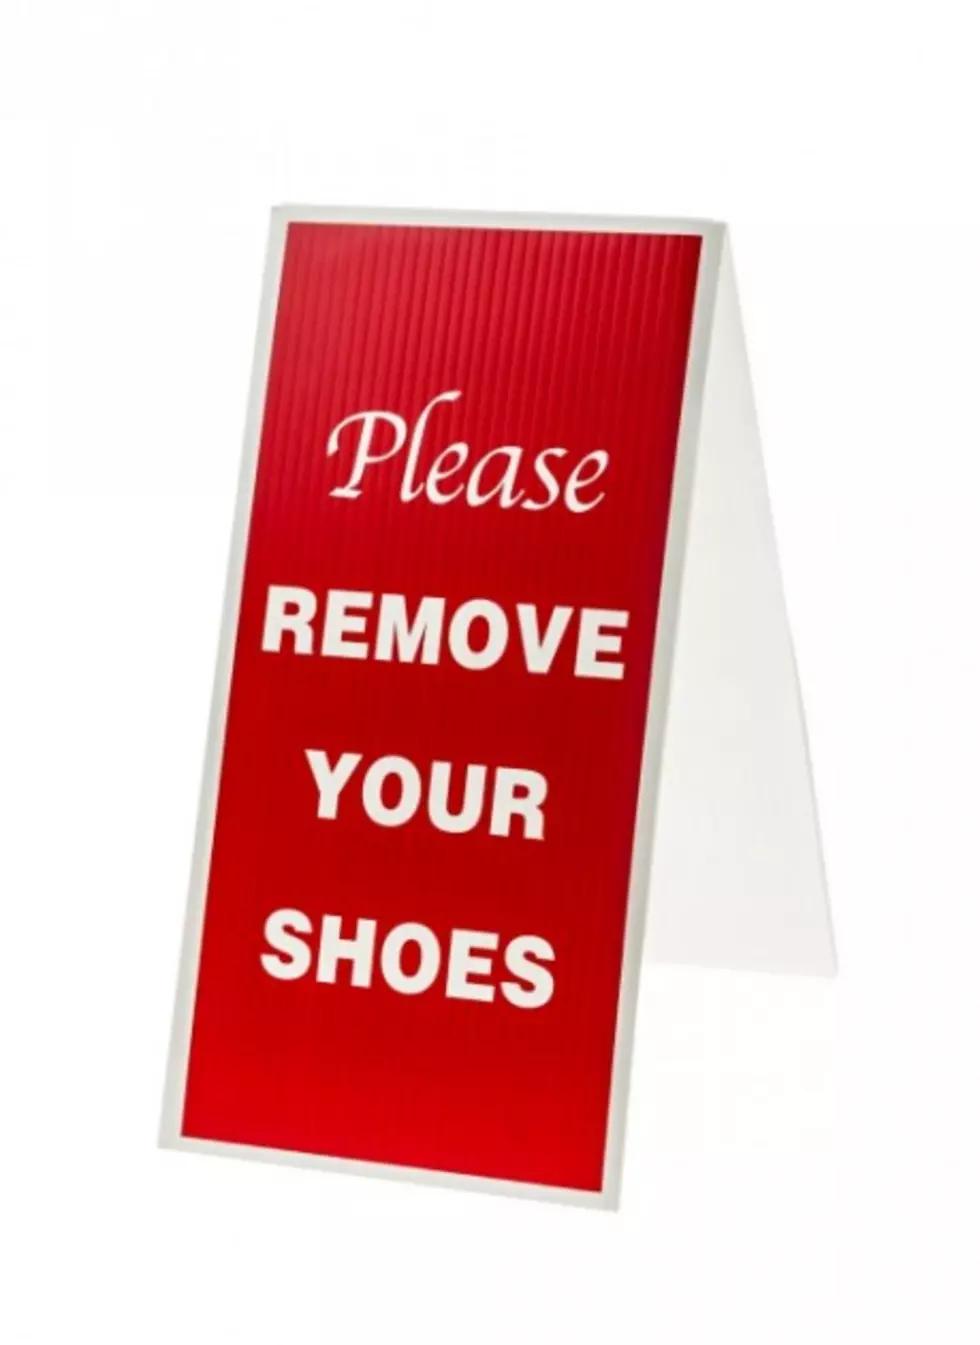 Is It Rude To Ask People To Remove Their Shoes?